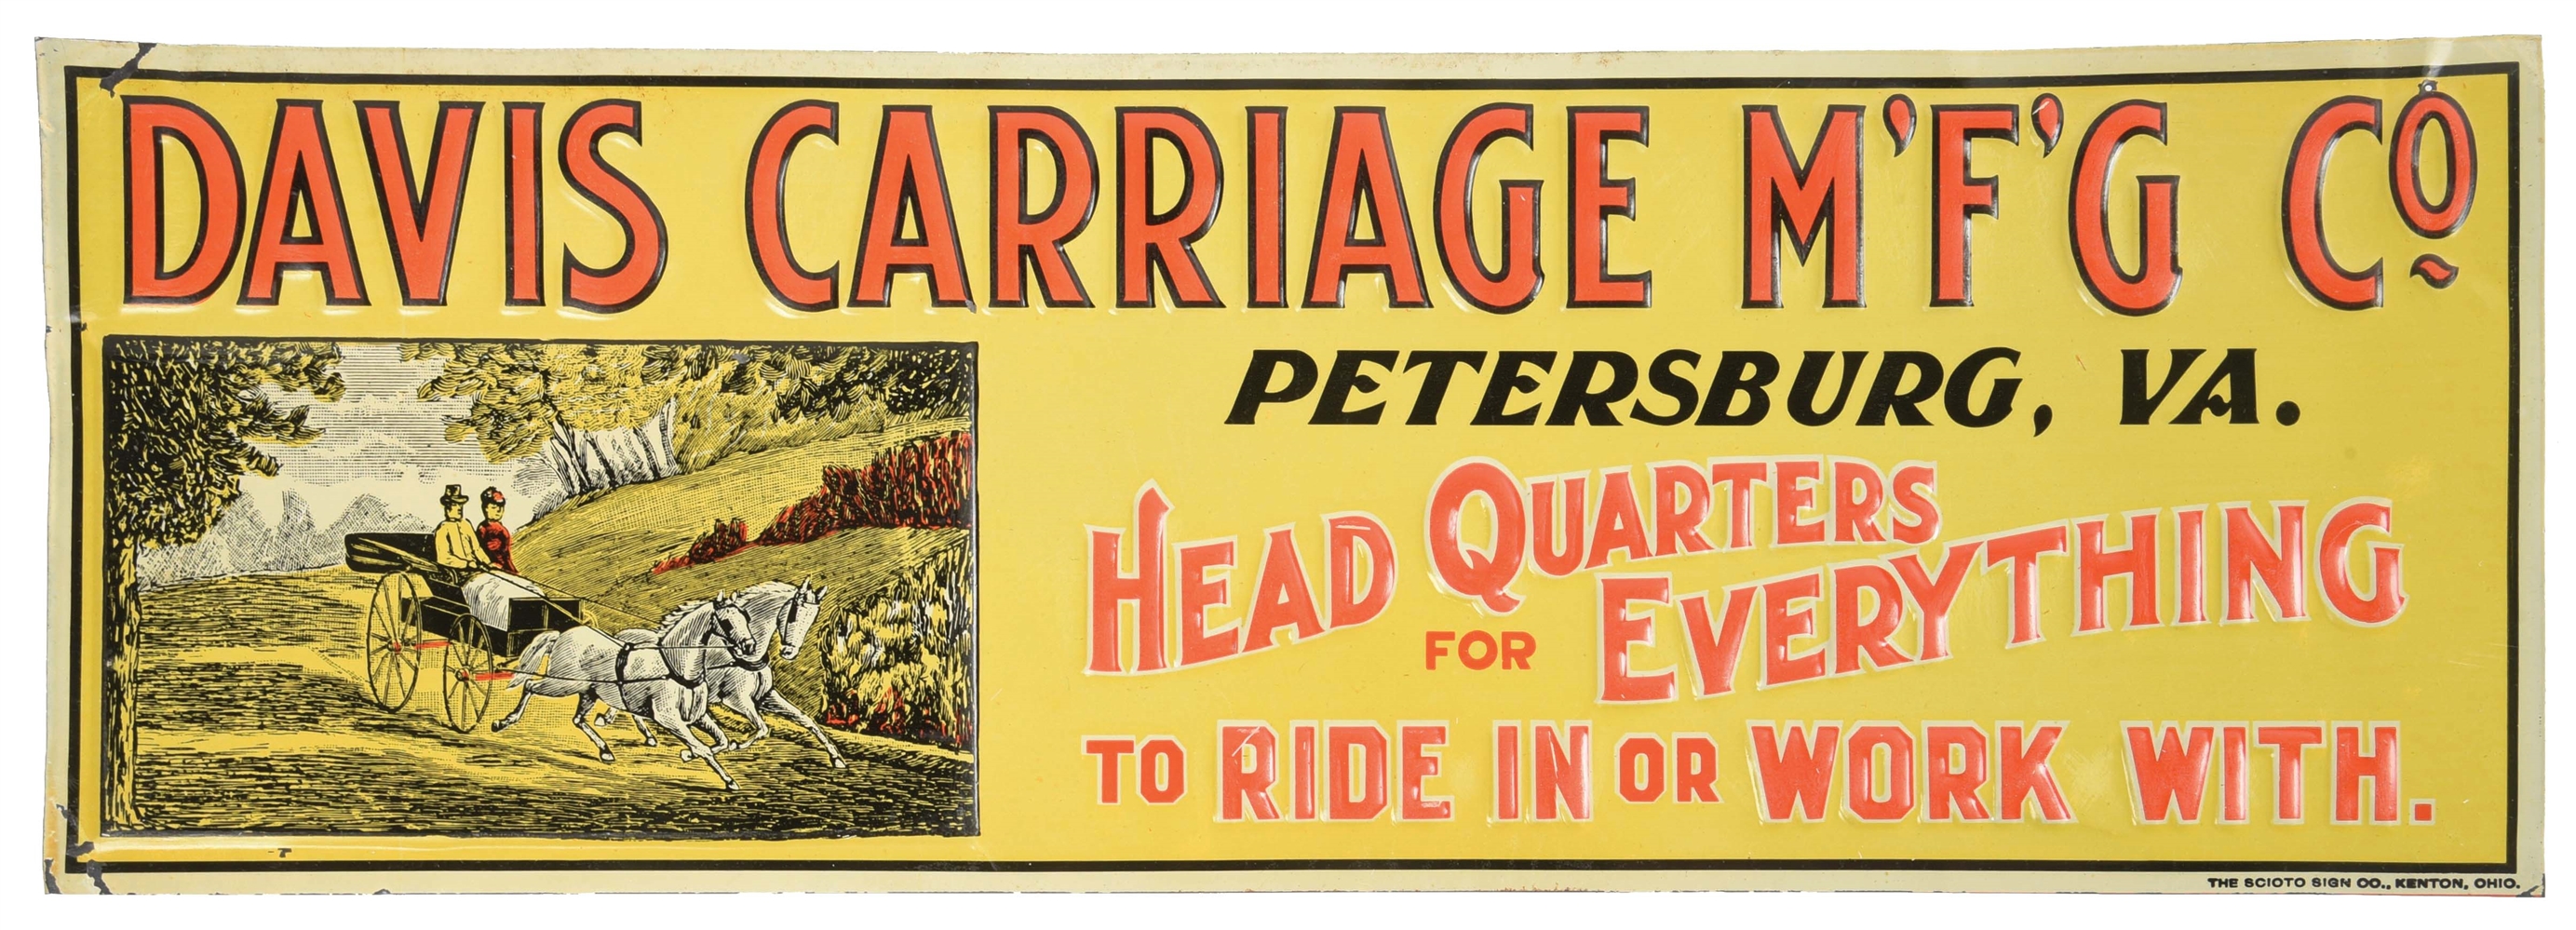 EMBOSSED DAVIS CARRIAGE TIN SIGN W/ HORSE & CARRIAGE GRAPHIC.